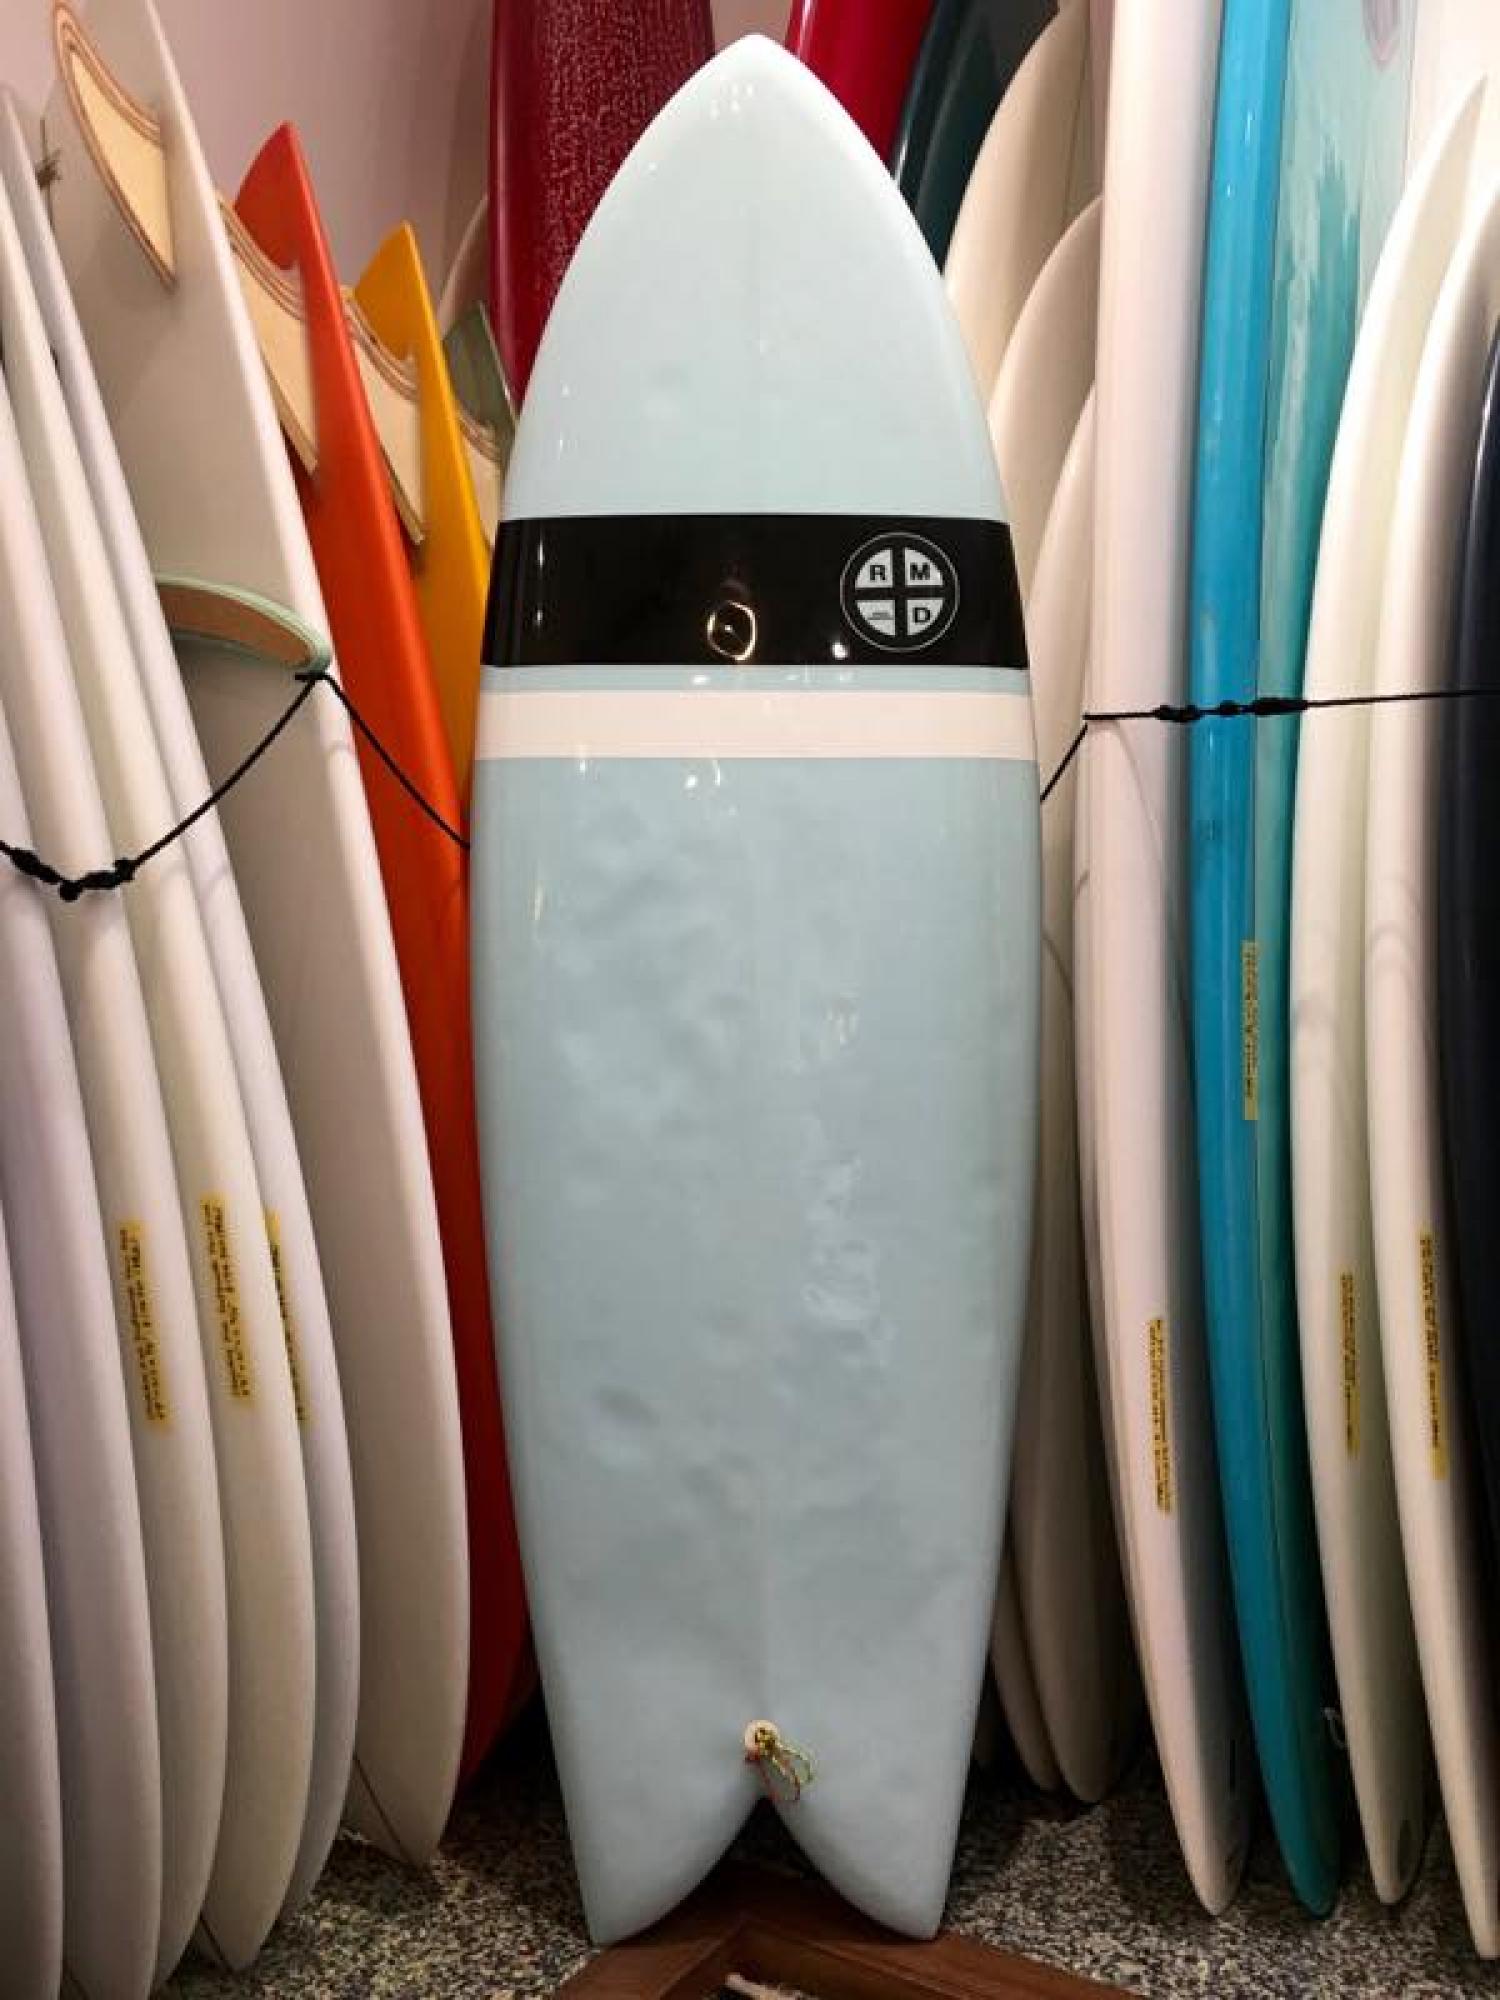 USED BOARDS （RMD SURFBOARDS 5.7 Hybrid Twin）